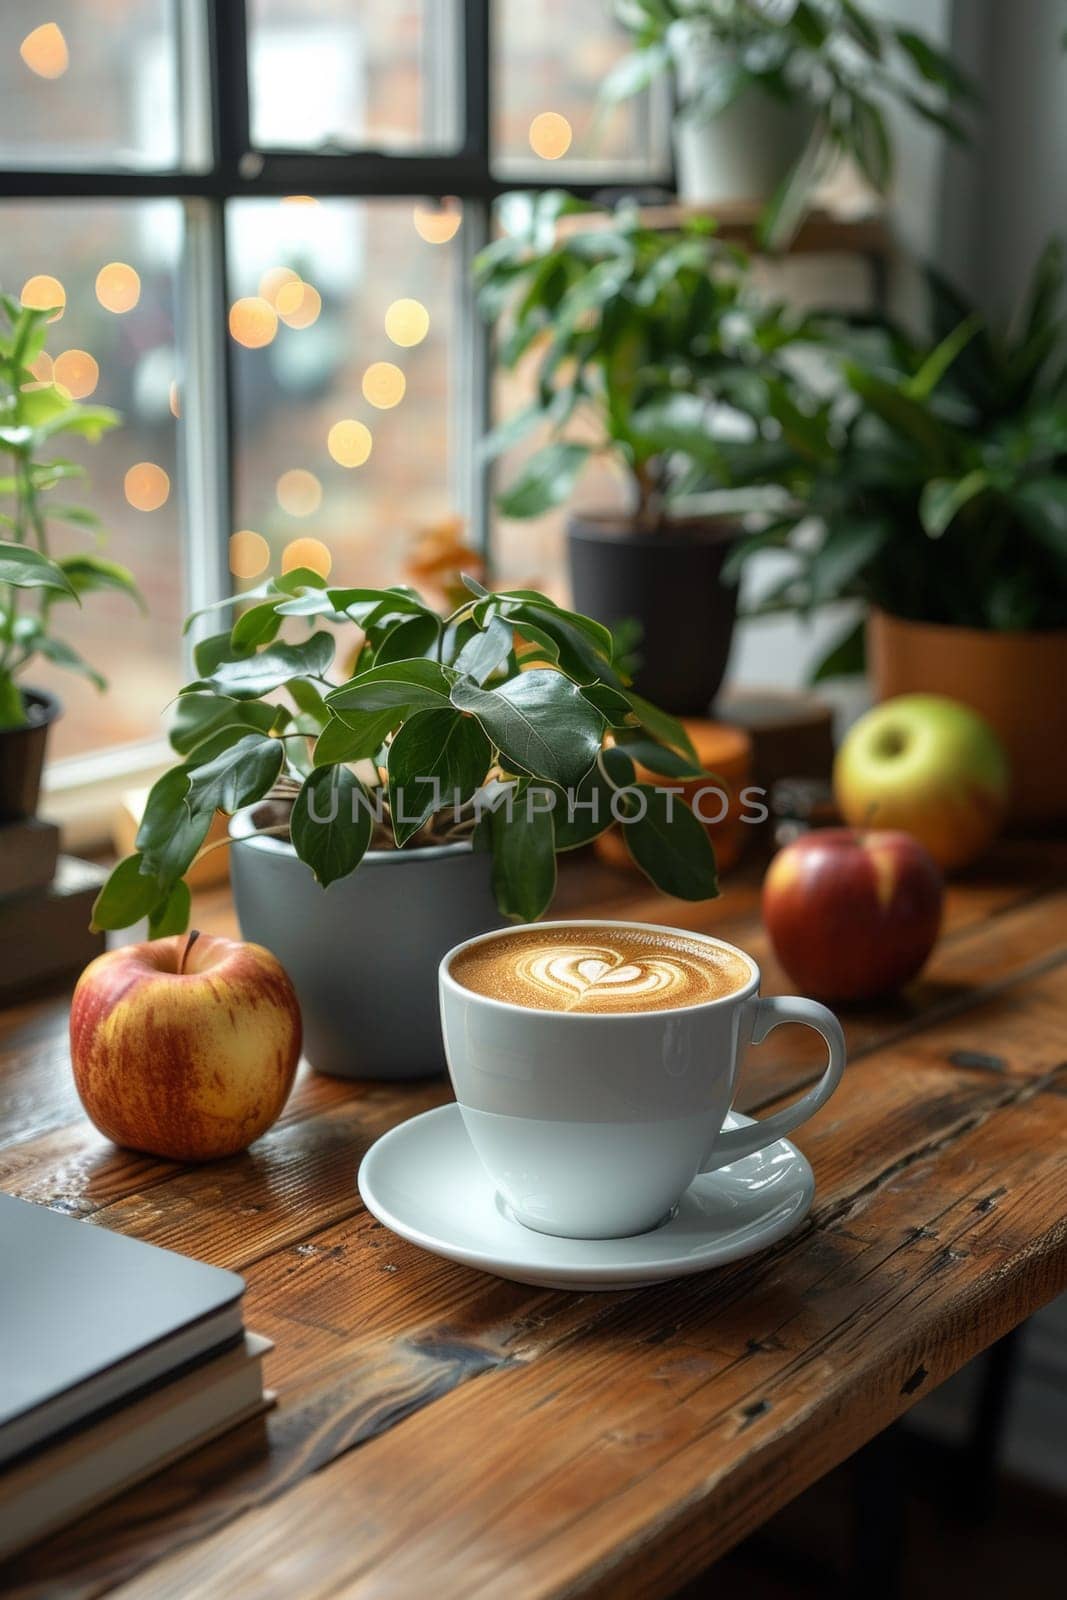 A cup of coffee on a table next to an apple and potted plant